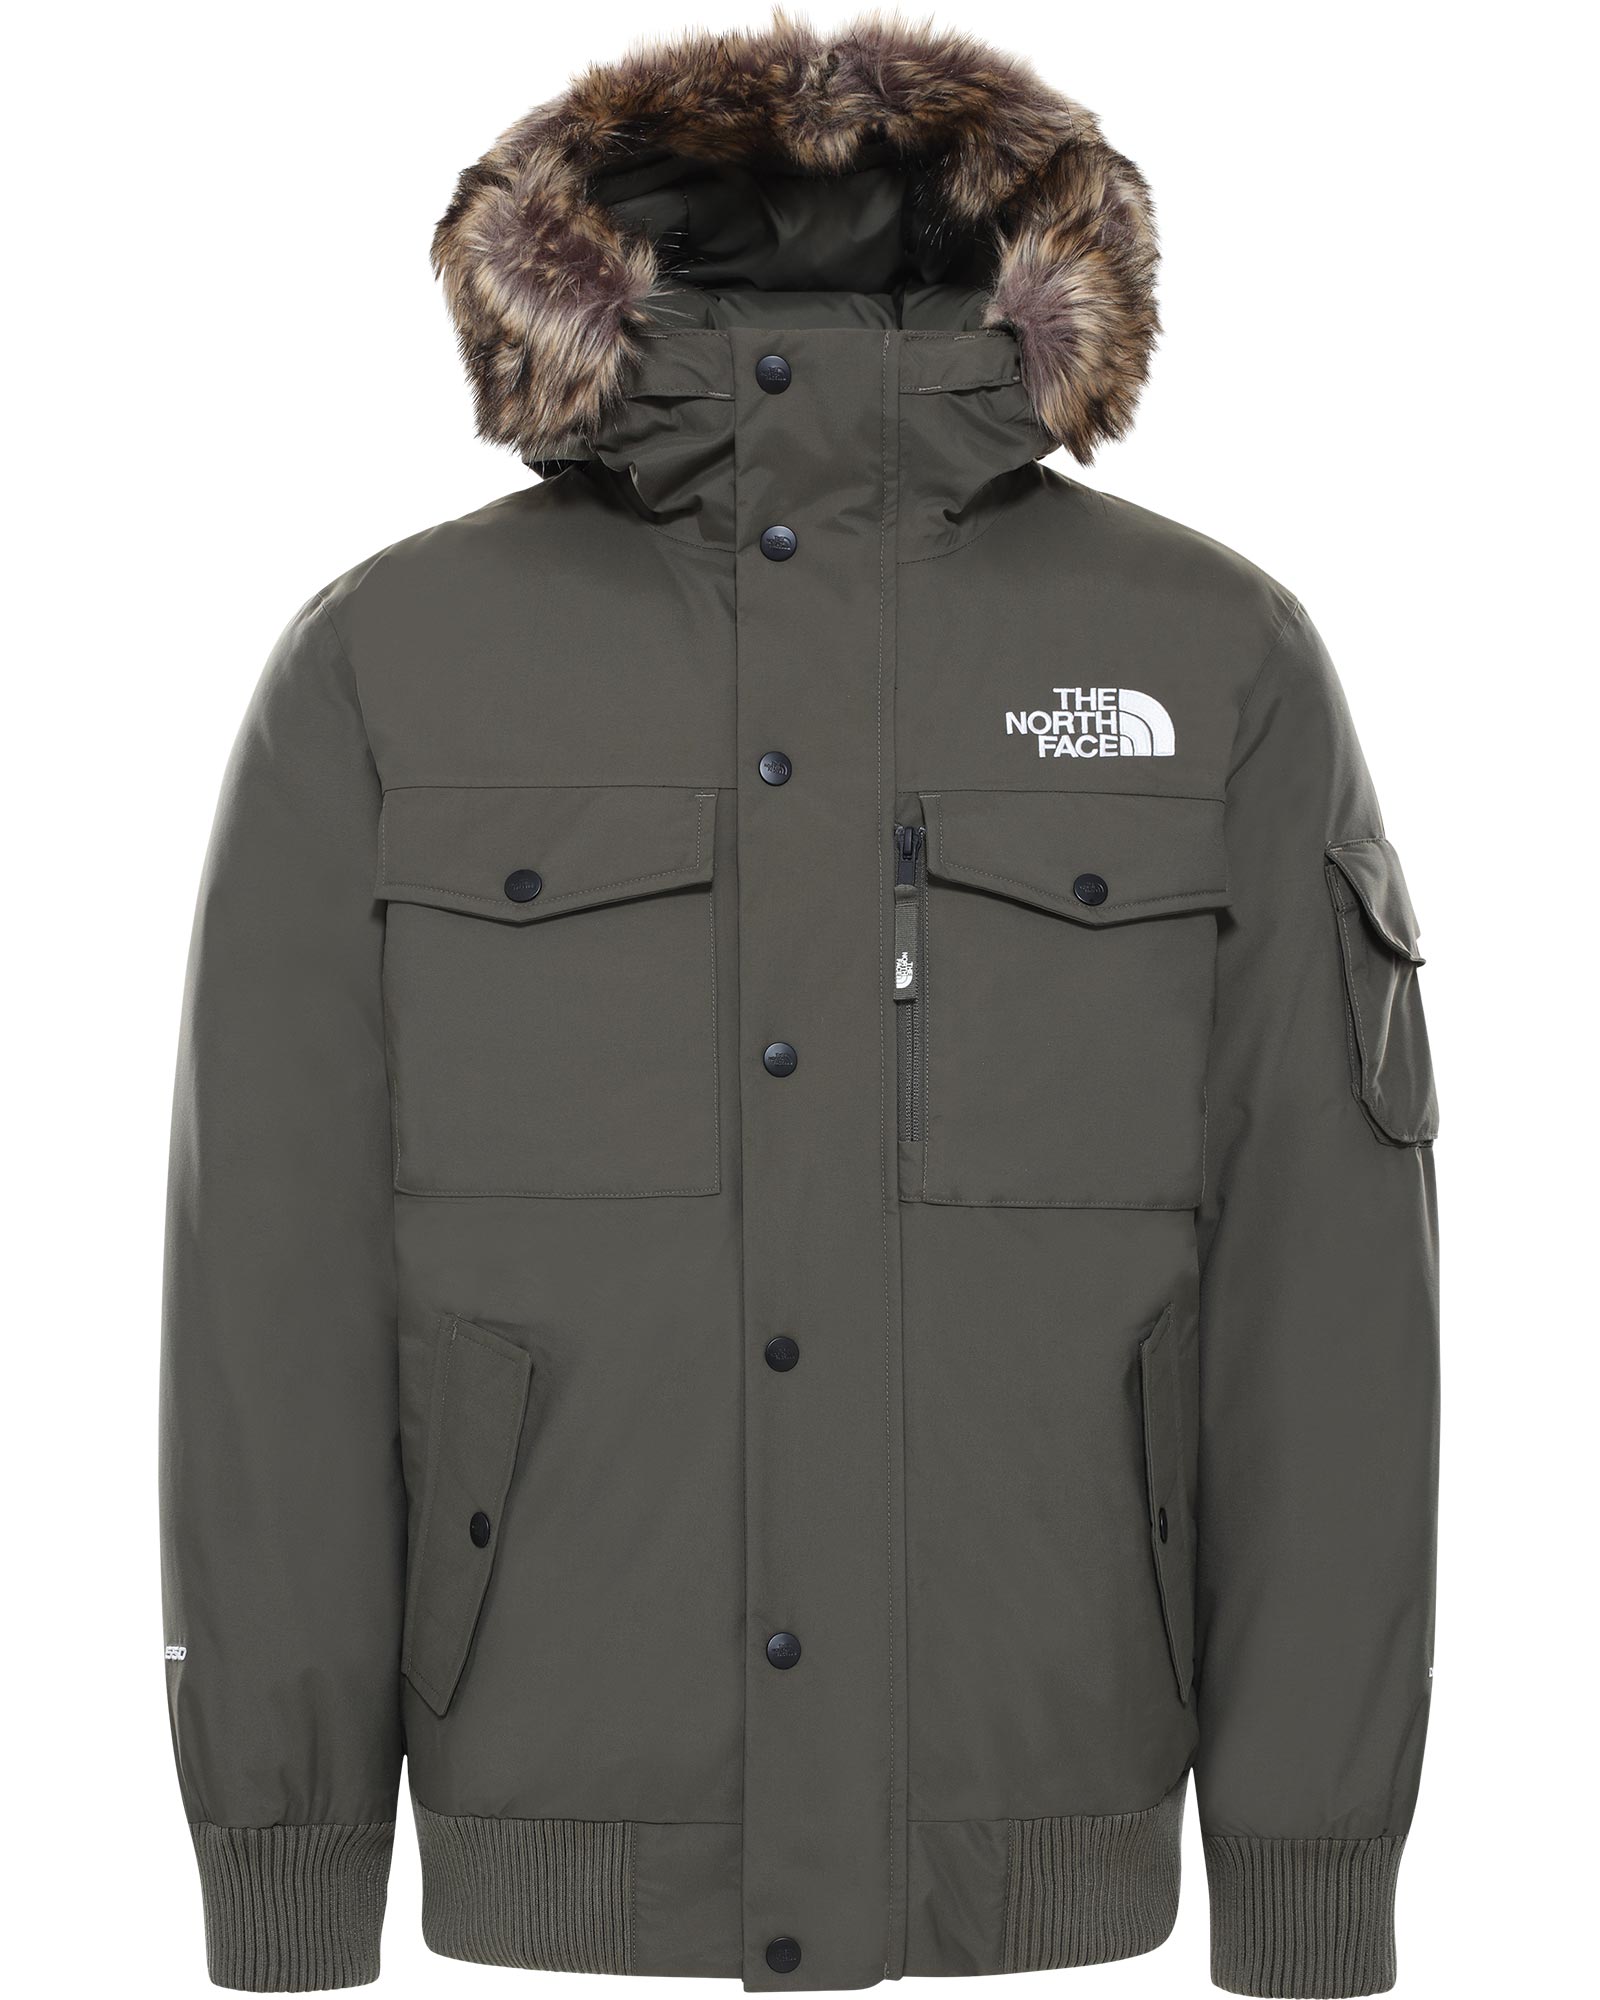 The North Face Gotham Men’s Down Jacket - New Taupe Green XS